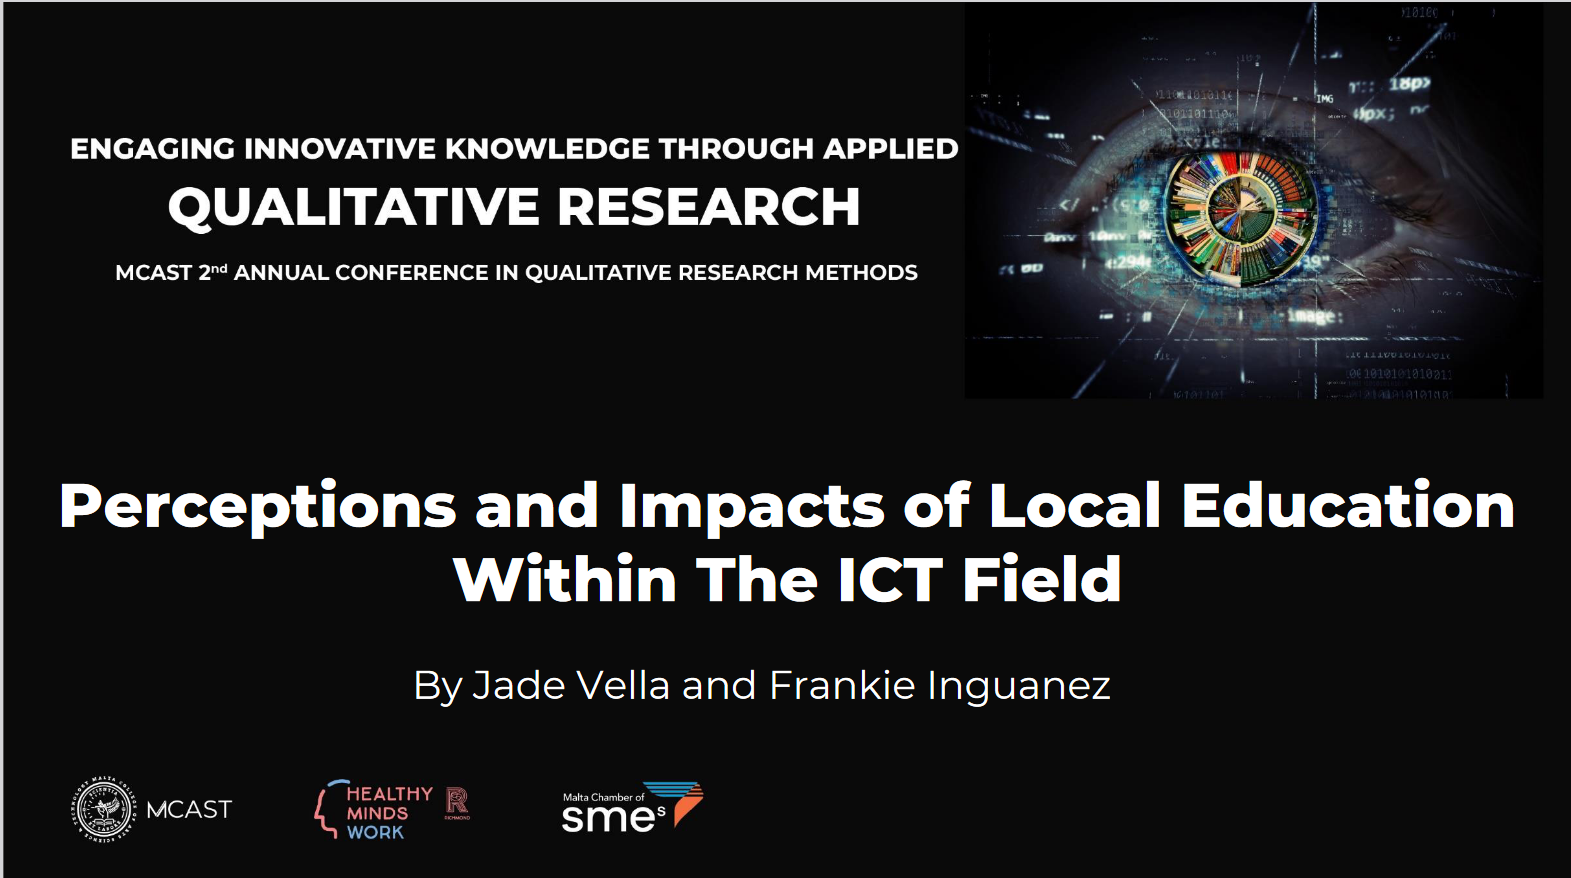 Perceptions and Impacts of Local Education within the ICT Field